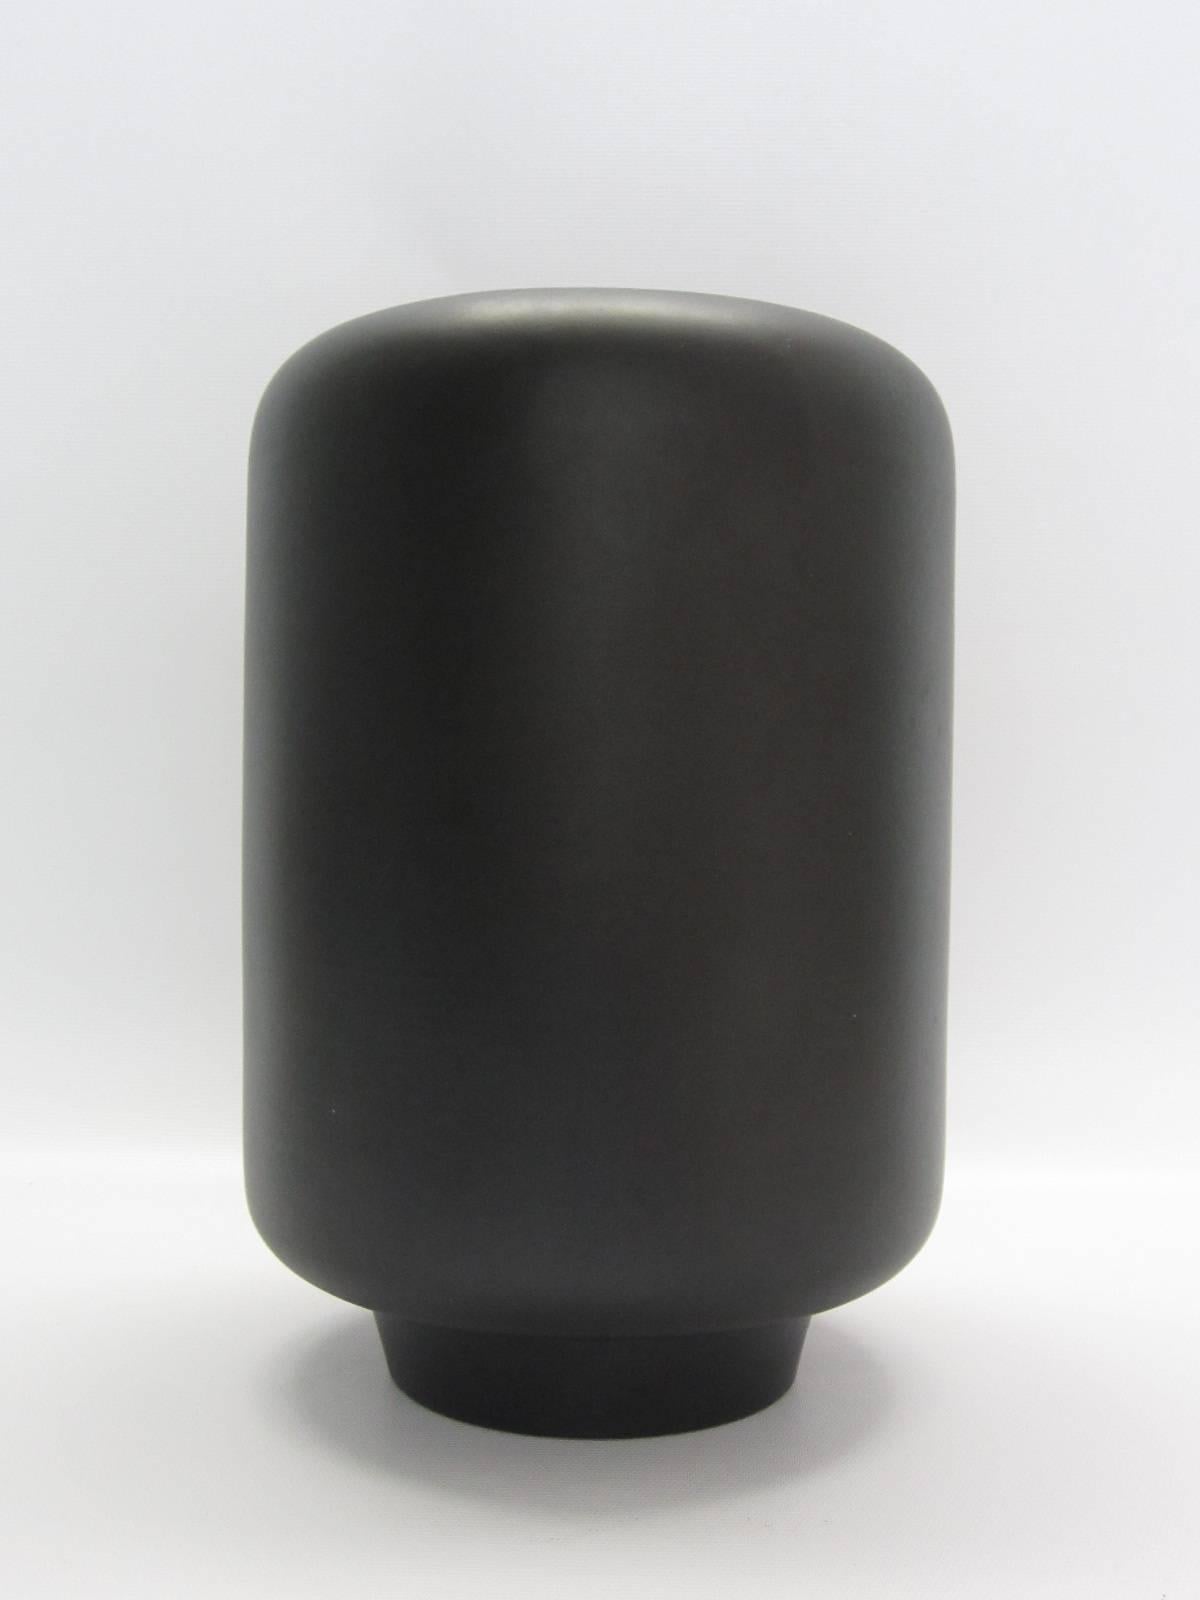 Beautifully shaped, this matte black ceramic vase was designed by Tom Ford for the Gucci store in NYC. Signed and made in Italy.